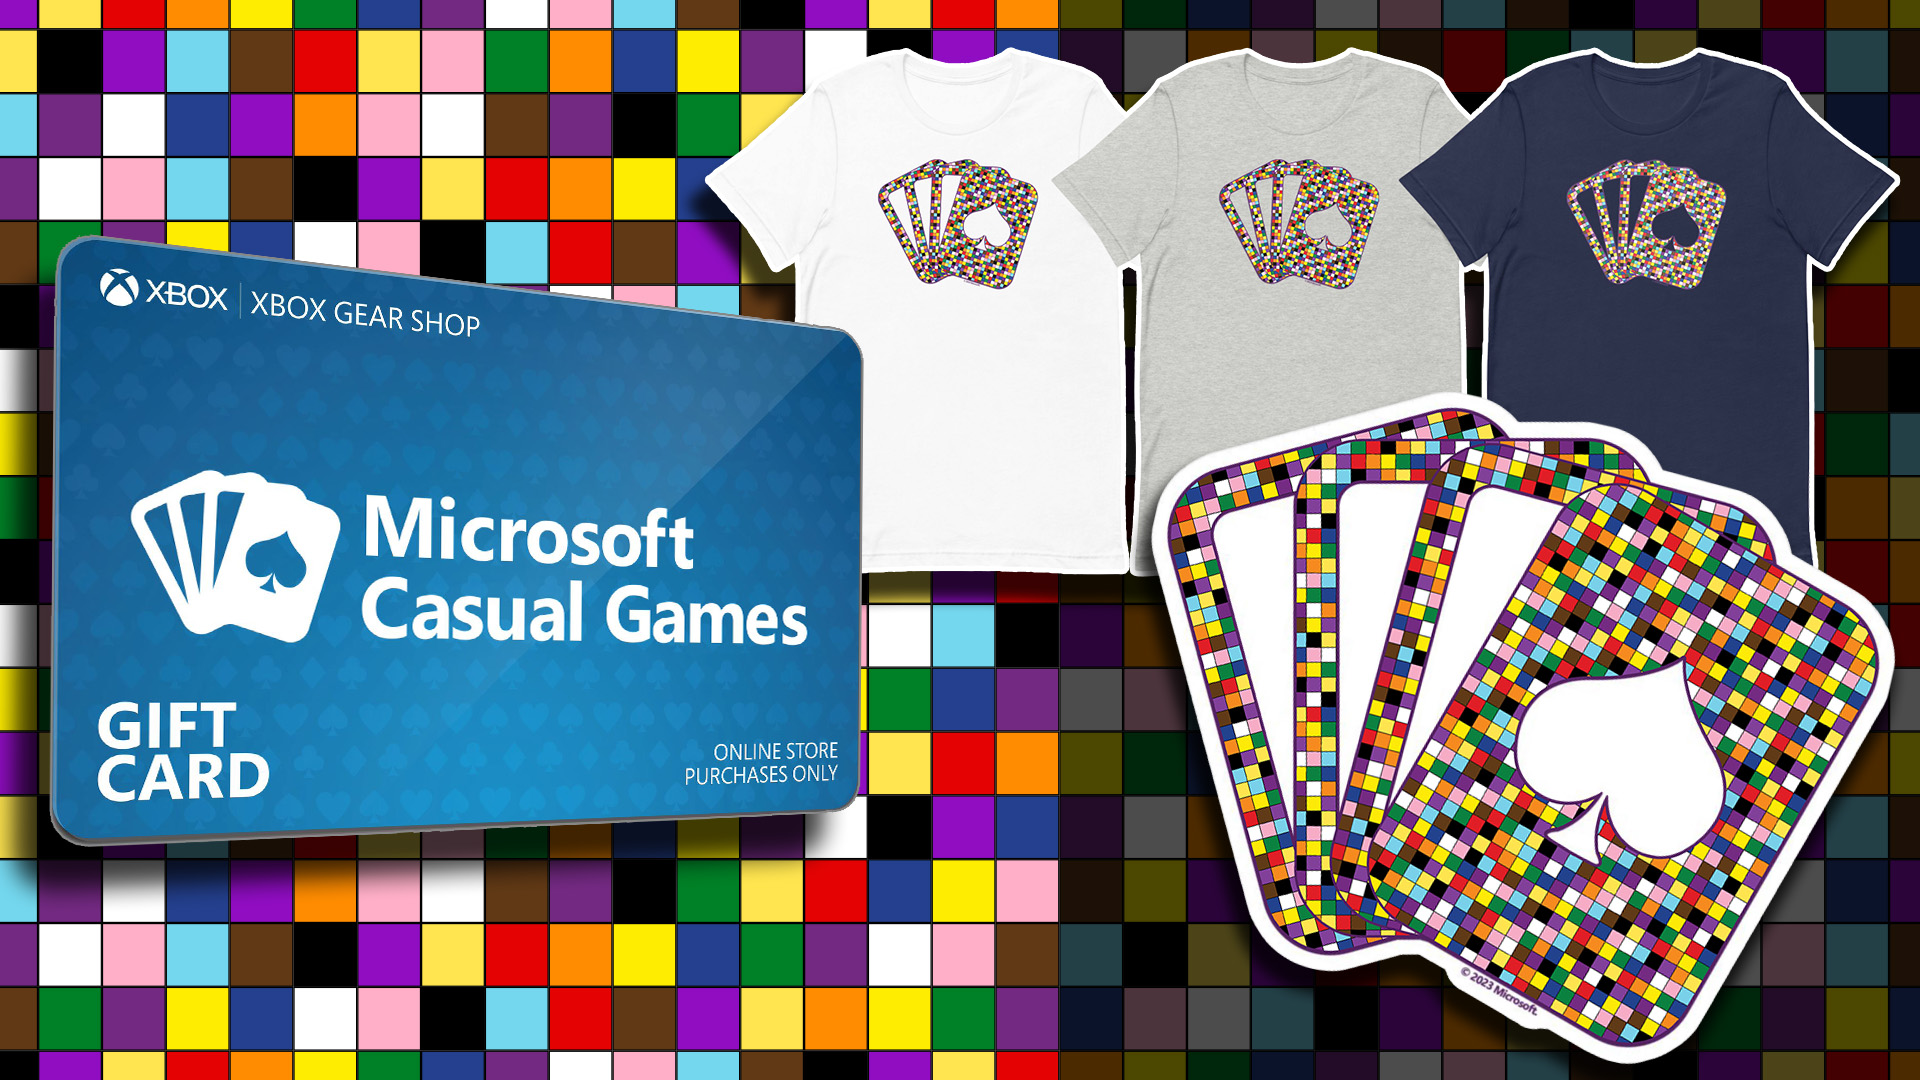 The background is covered with colorful checkered squares. A Microsoft Casual Games vinyl sticker and 3 t-shirts with the 2023 Pride design displayed on the right in white, grey, and navy blue. An Xbox Gear Shop gift card is on the left.